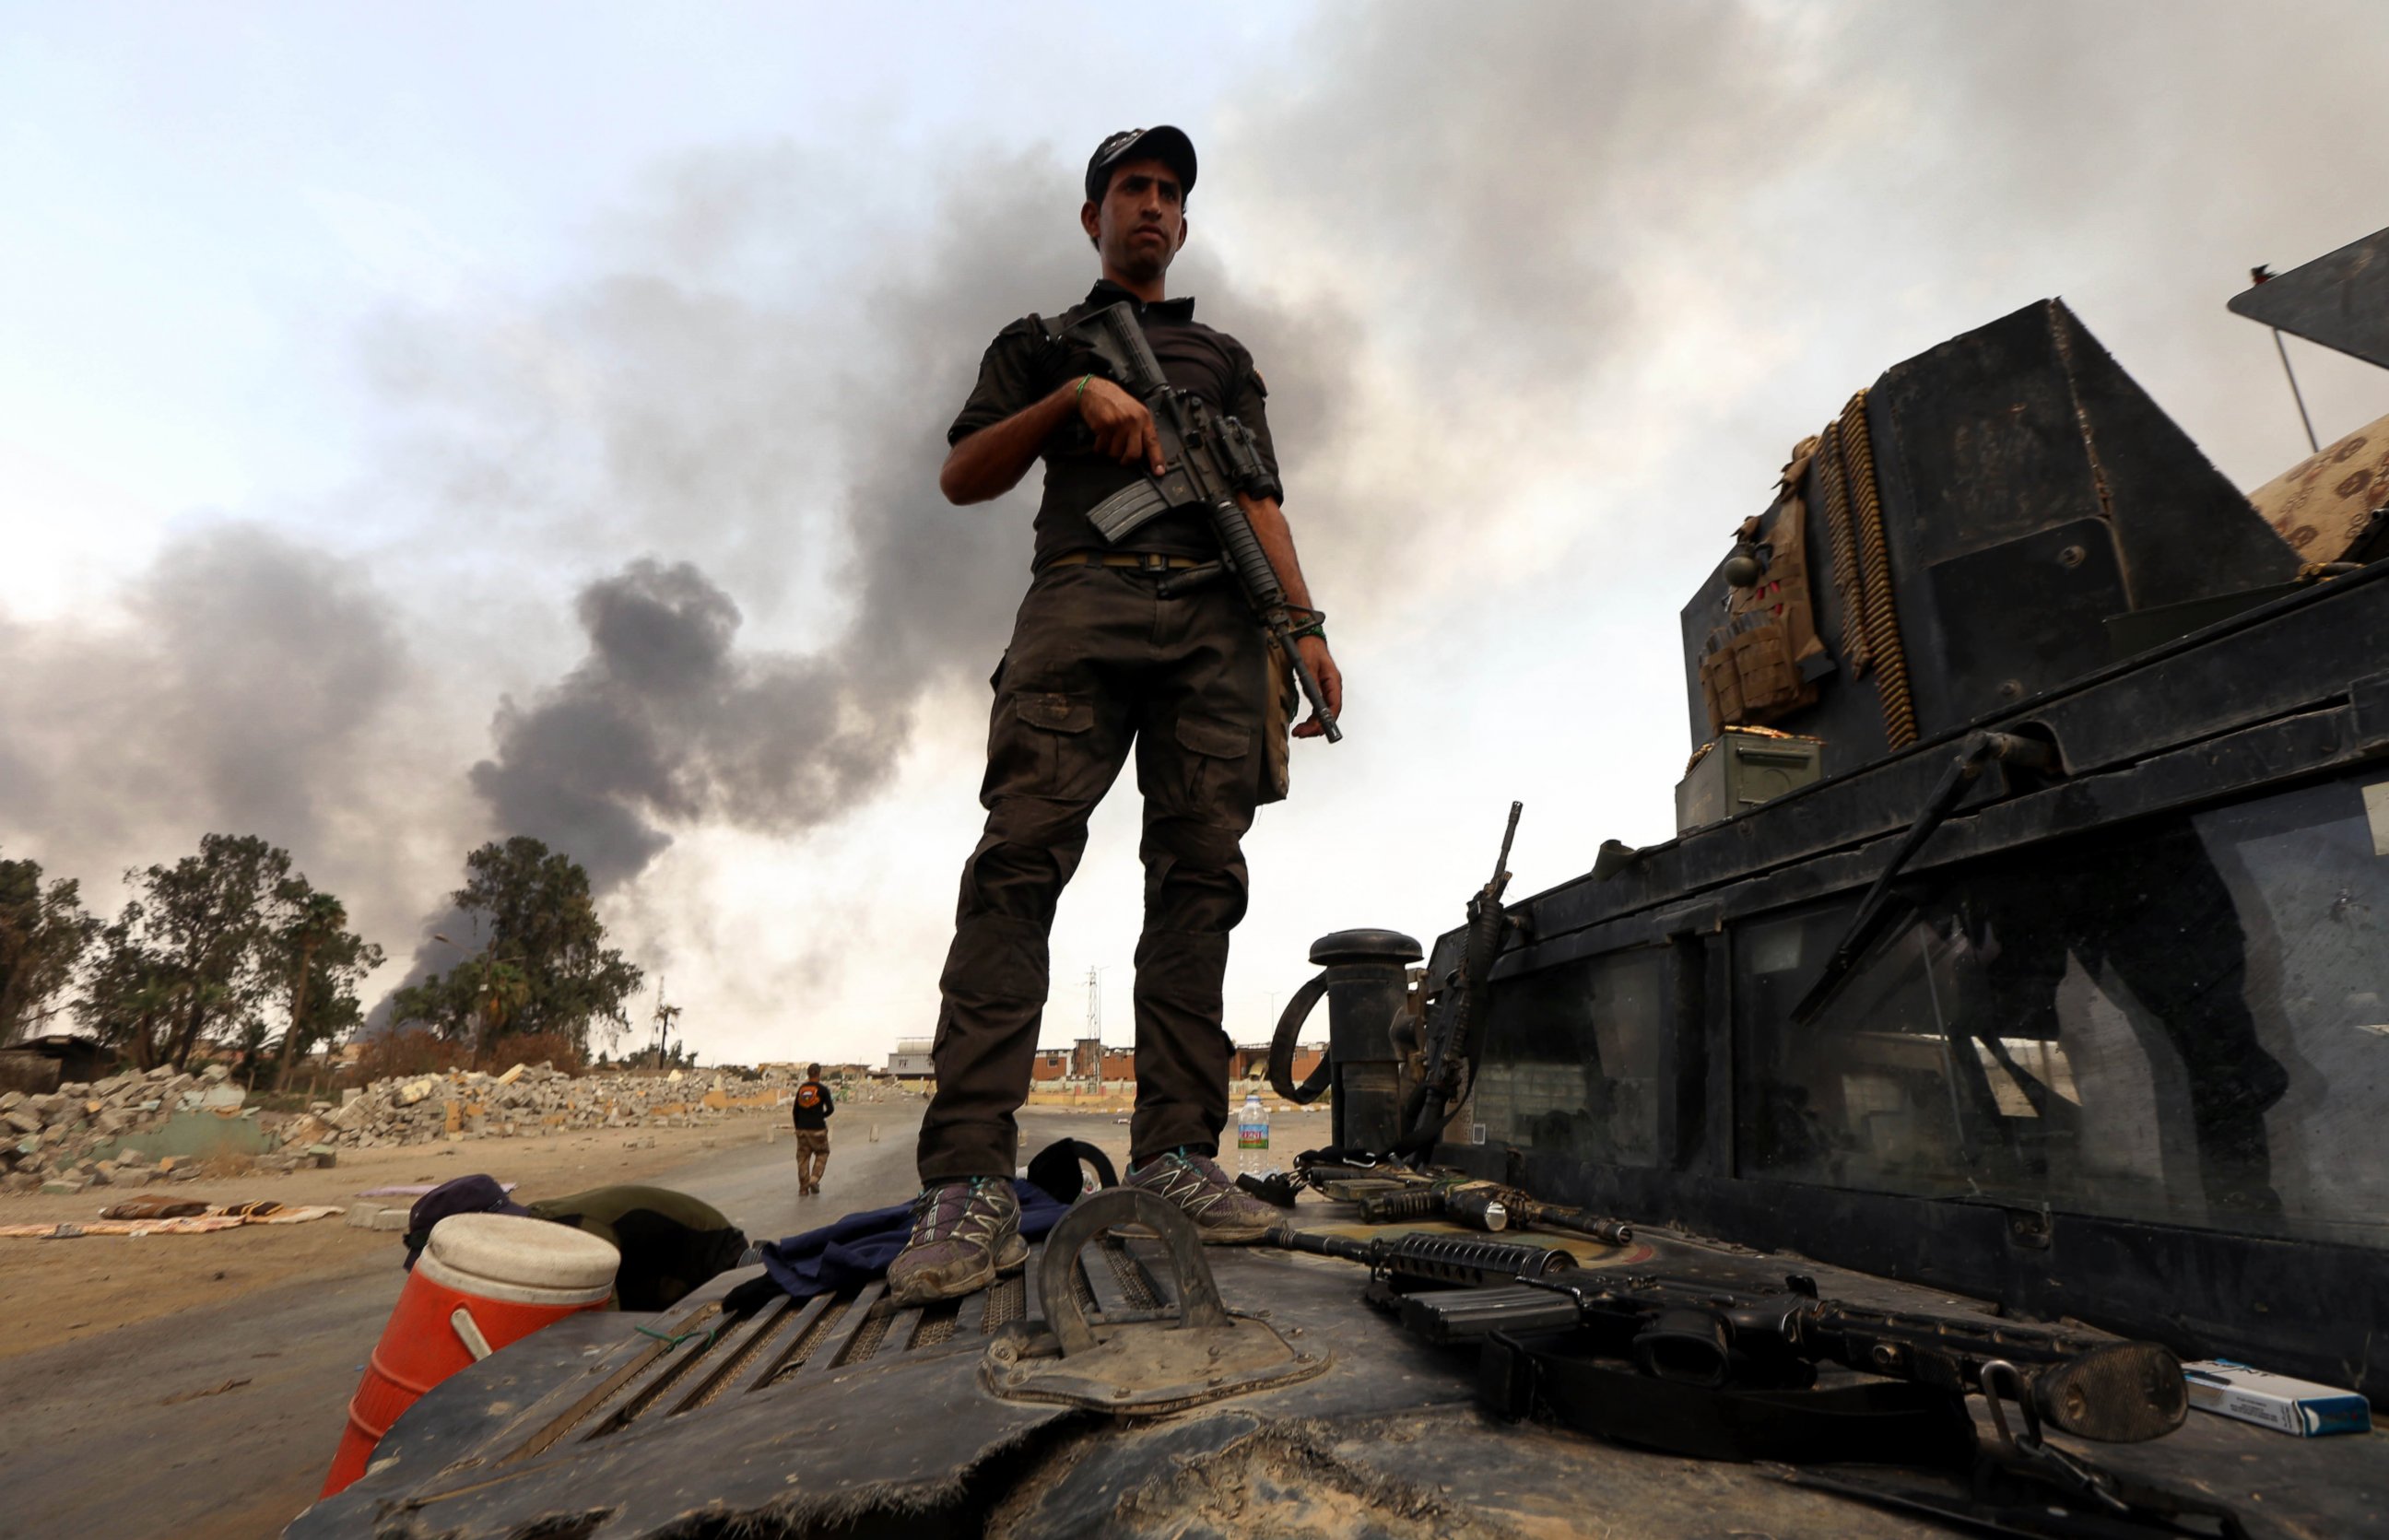 PHOTO: A member of the Iraqi government forces stands on a military vehicle as smoke billows from oil wells, set ablaze by Islamic State (IS) group militants before fleeing the oil-producing region of Qayyarah, Aug. 30, 2016. 